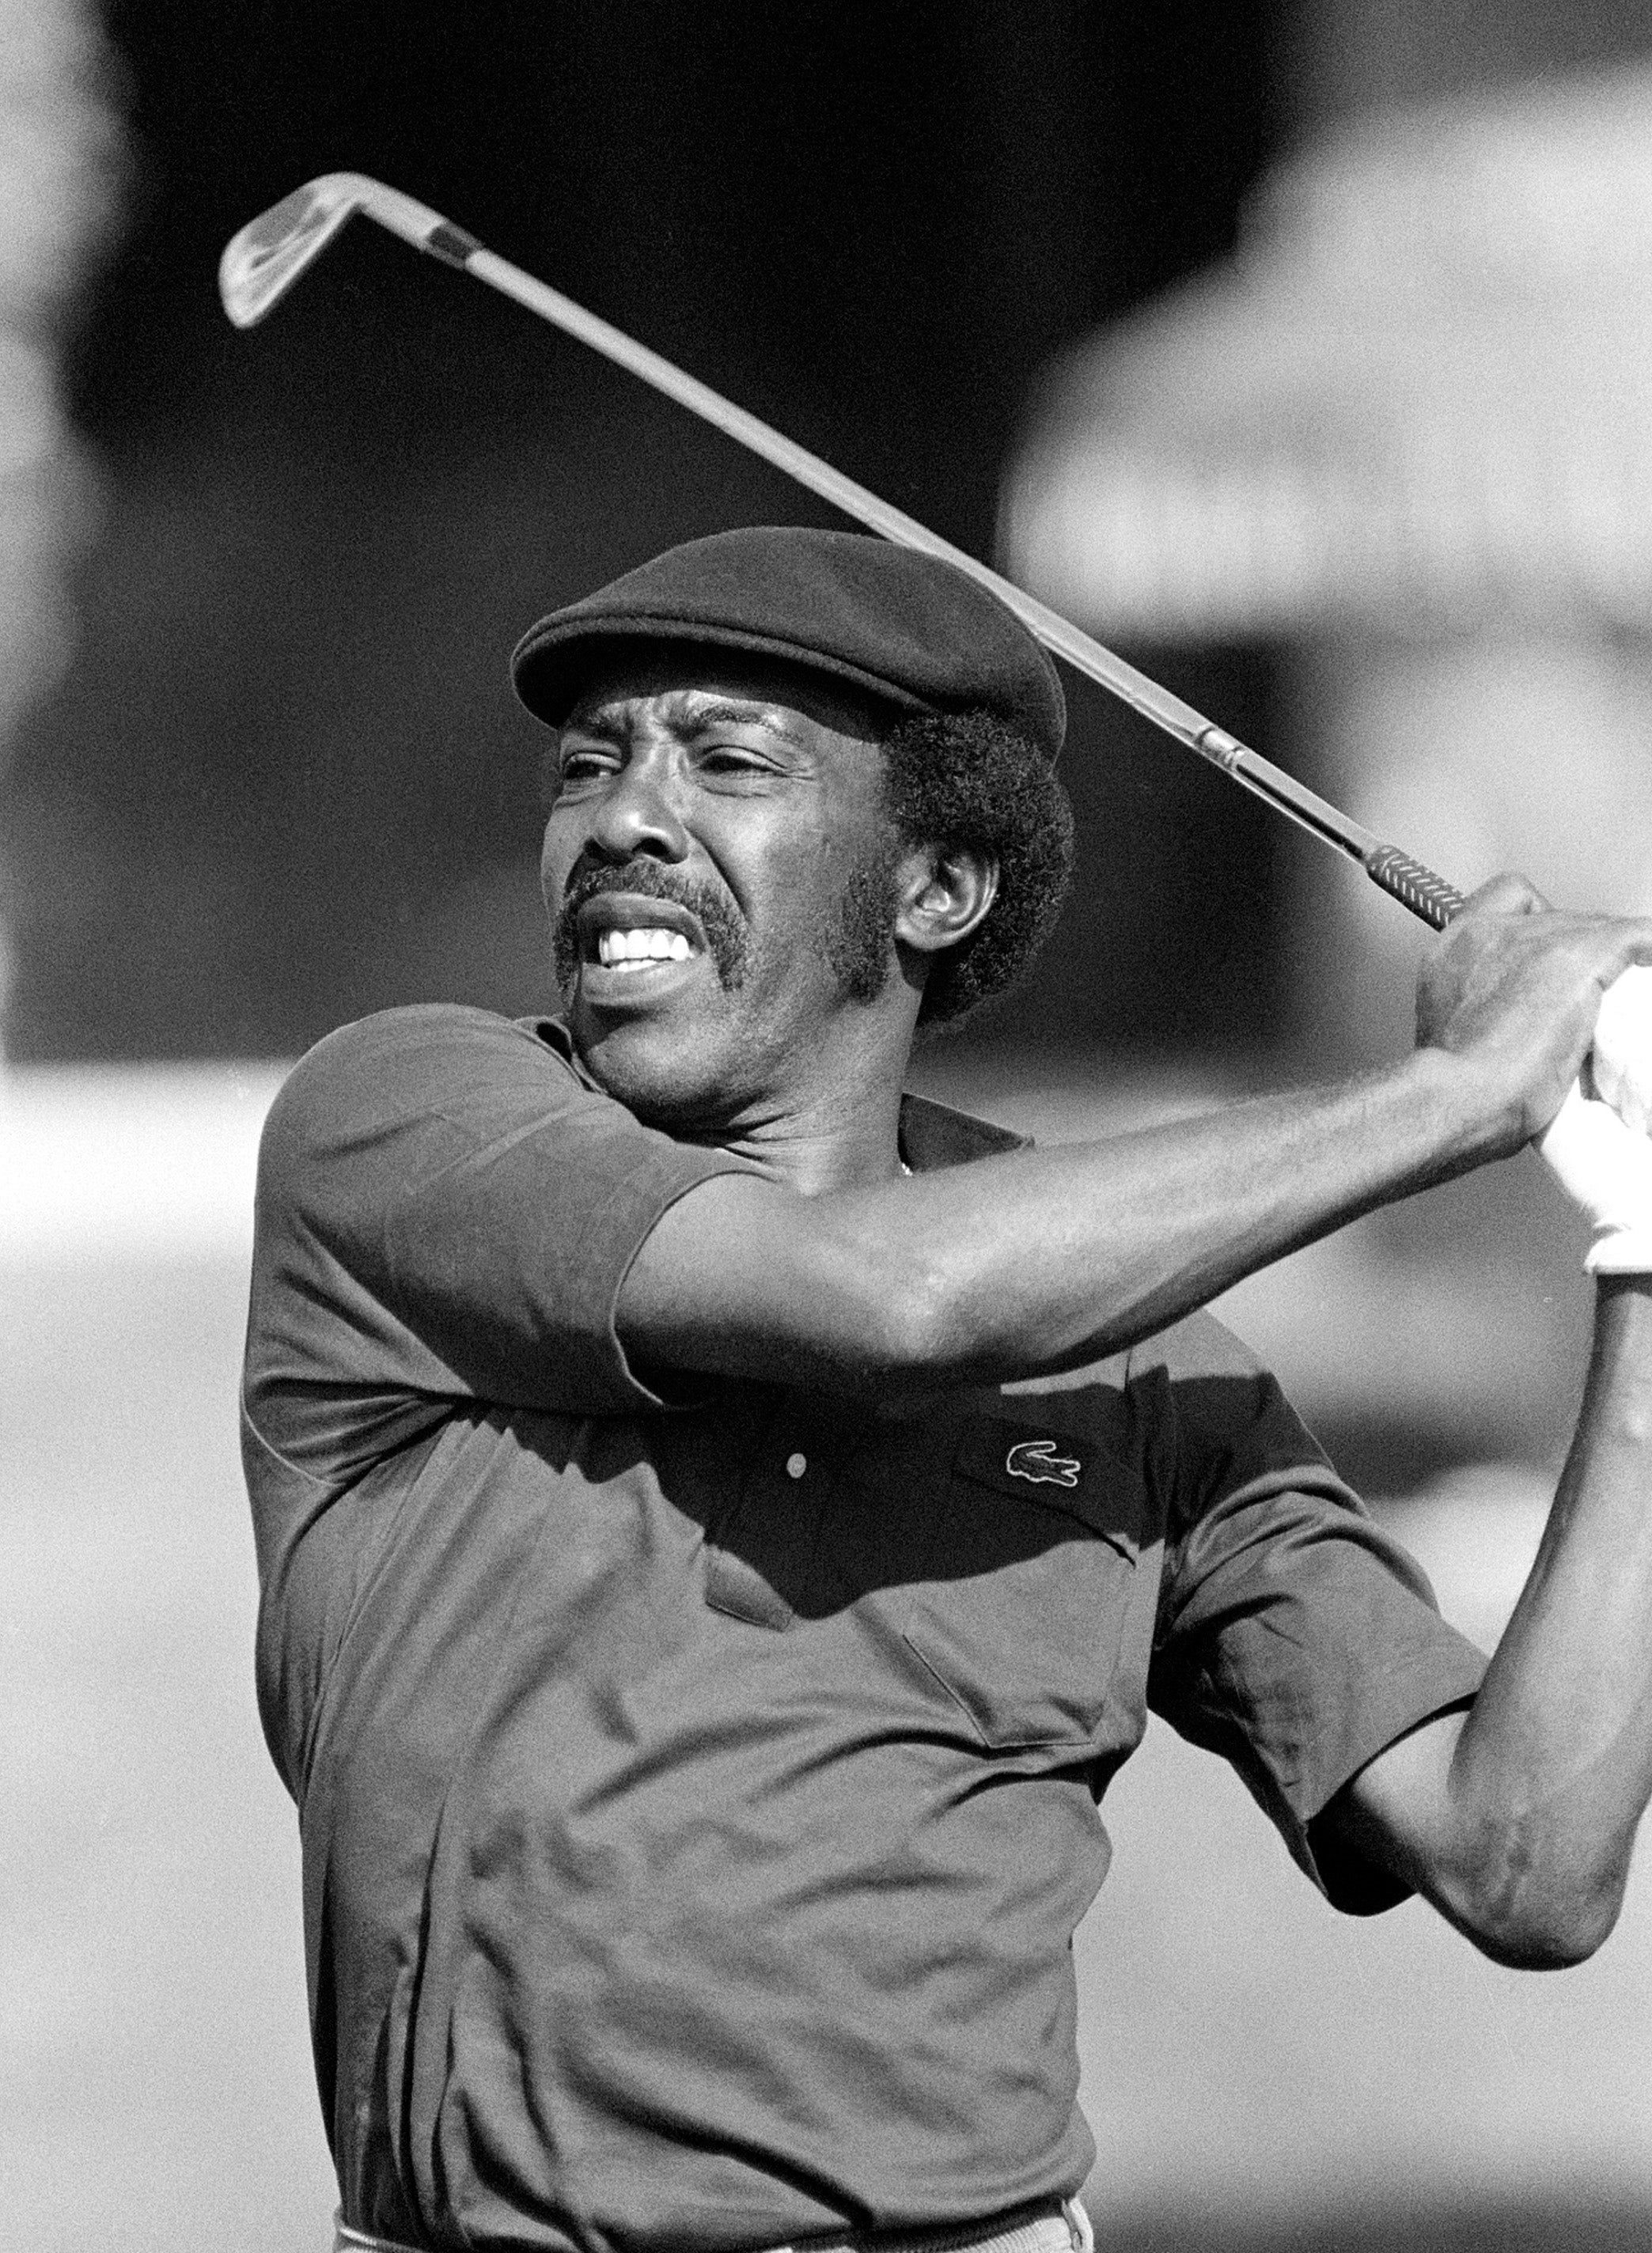 Peete in 1983: he played golf for the first time when he was 23